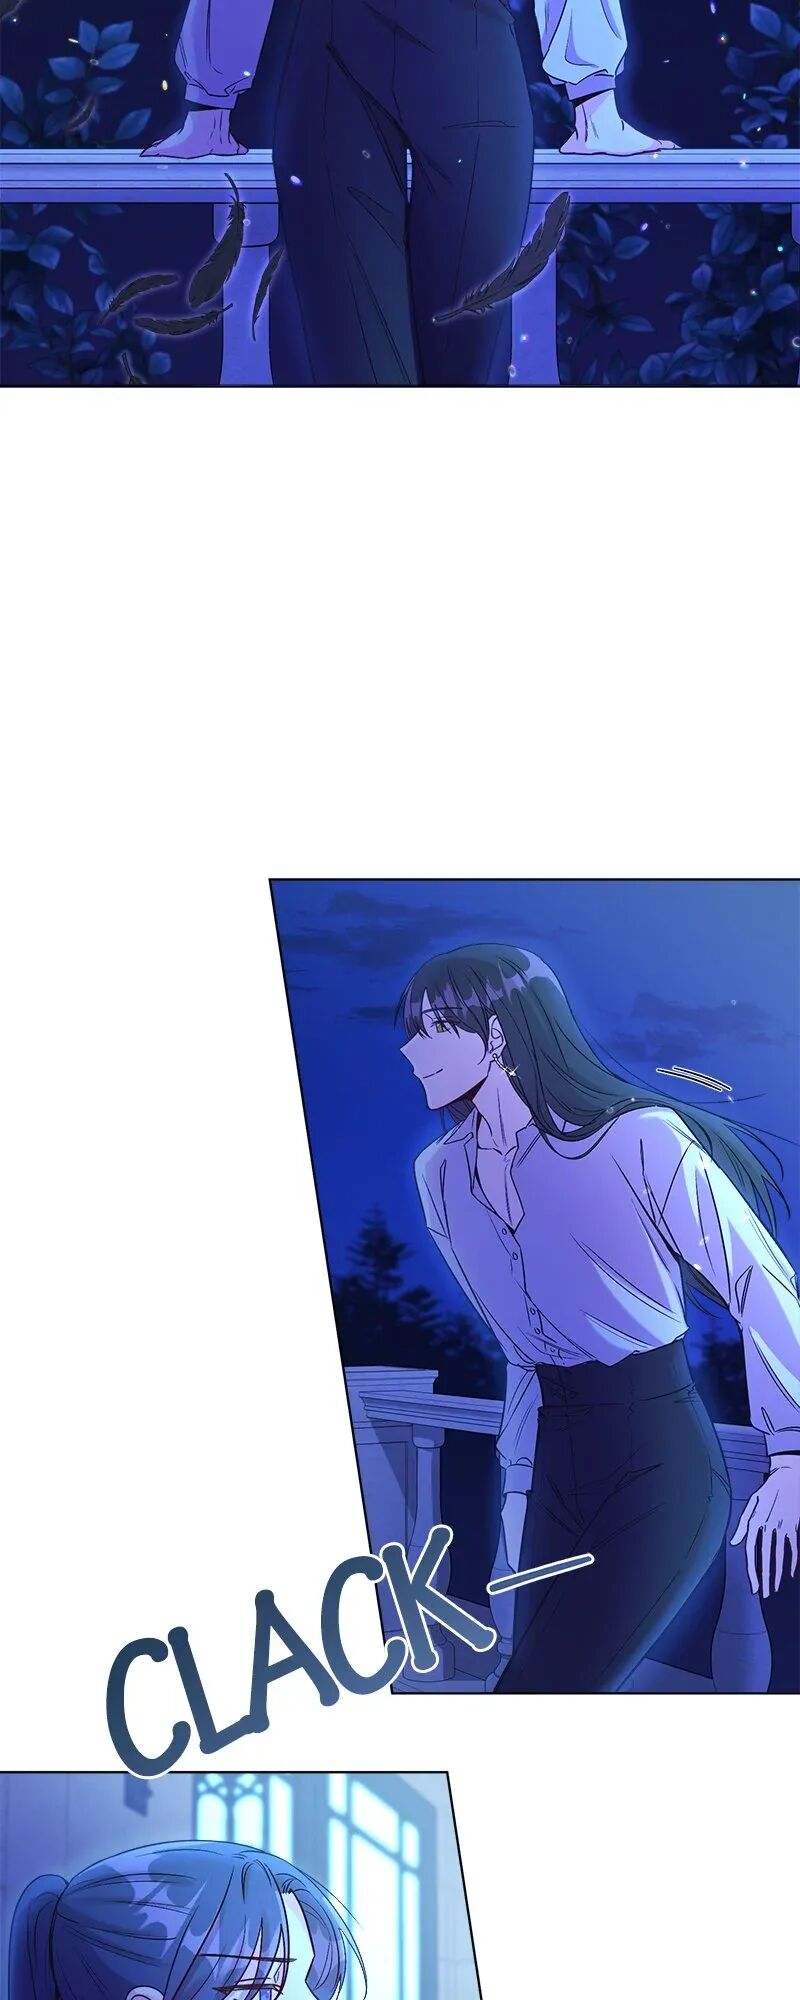 The Second Male Lead is Actually a Girl Chapter 10 - ManhwaFull.net